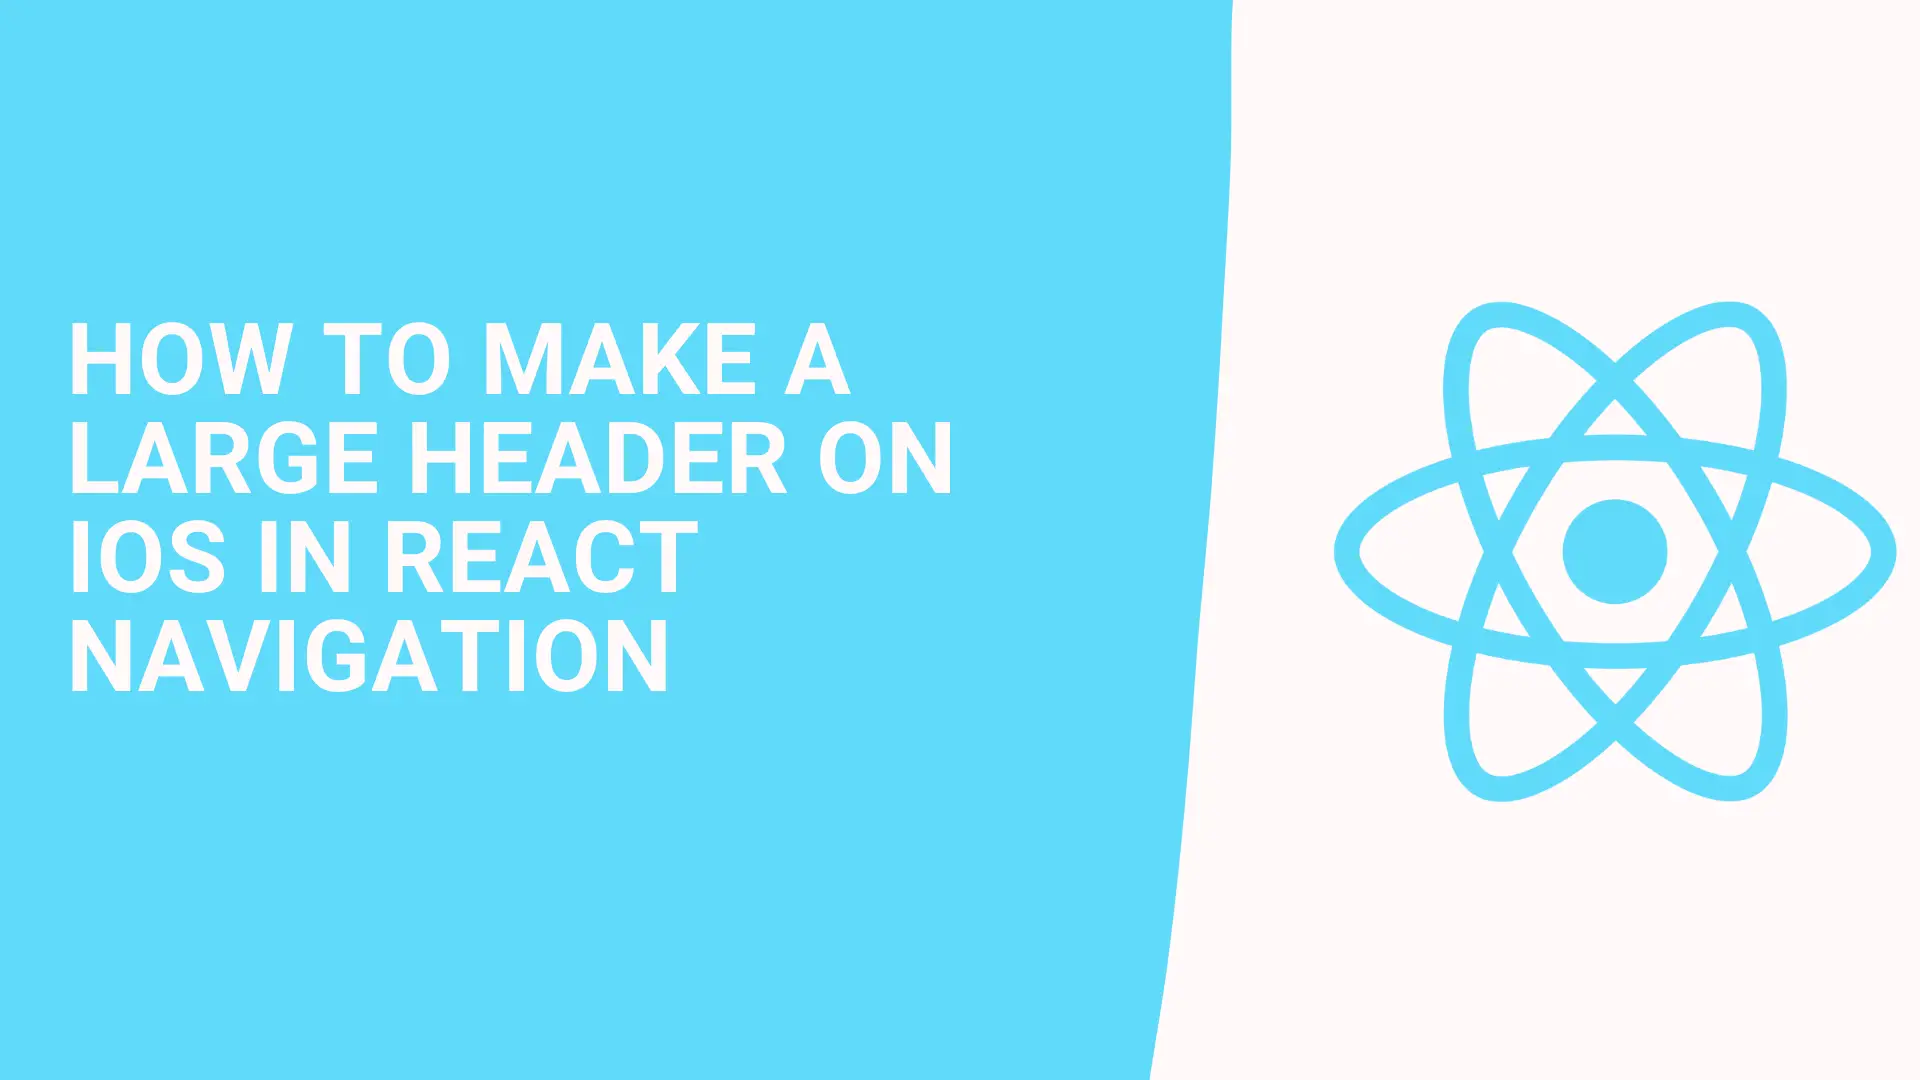 How to make a large header on iOS in React Navigation